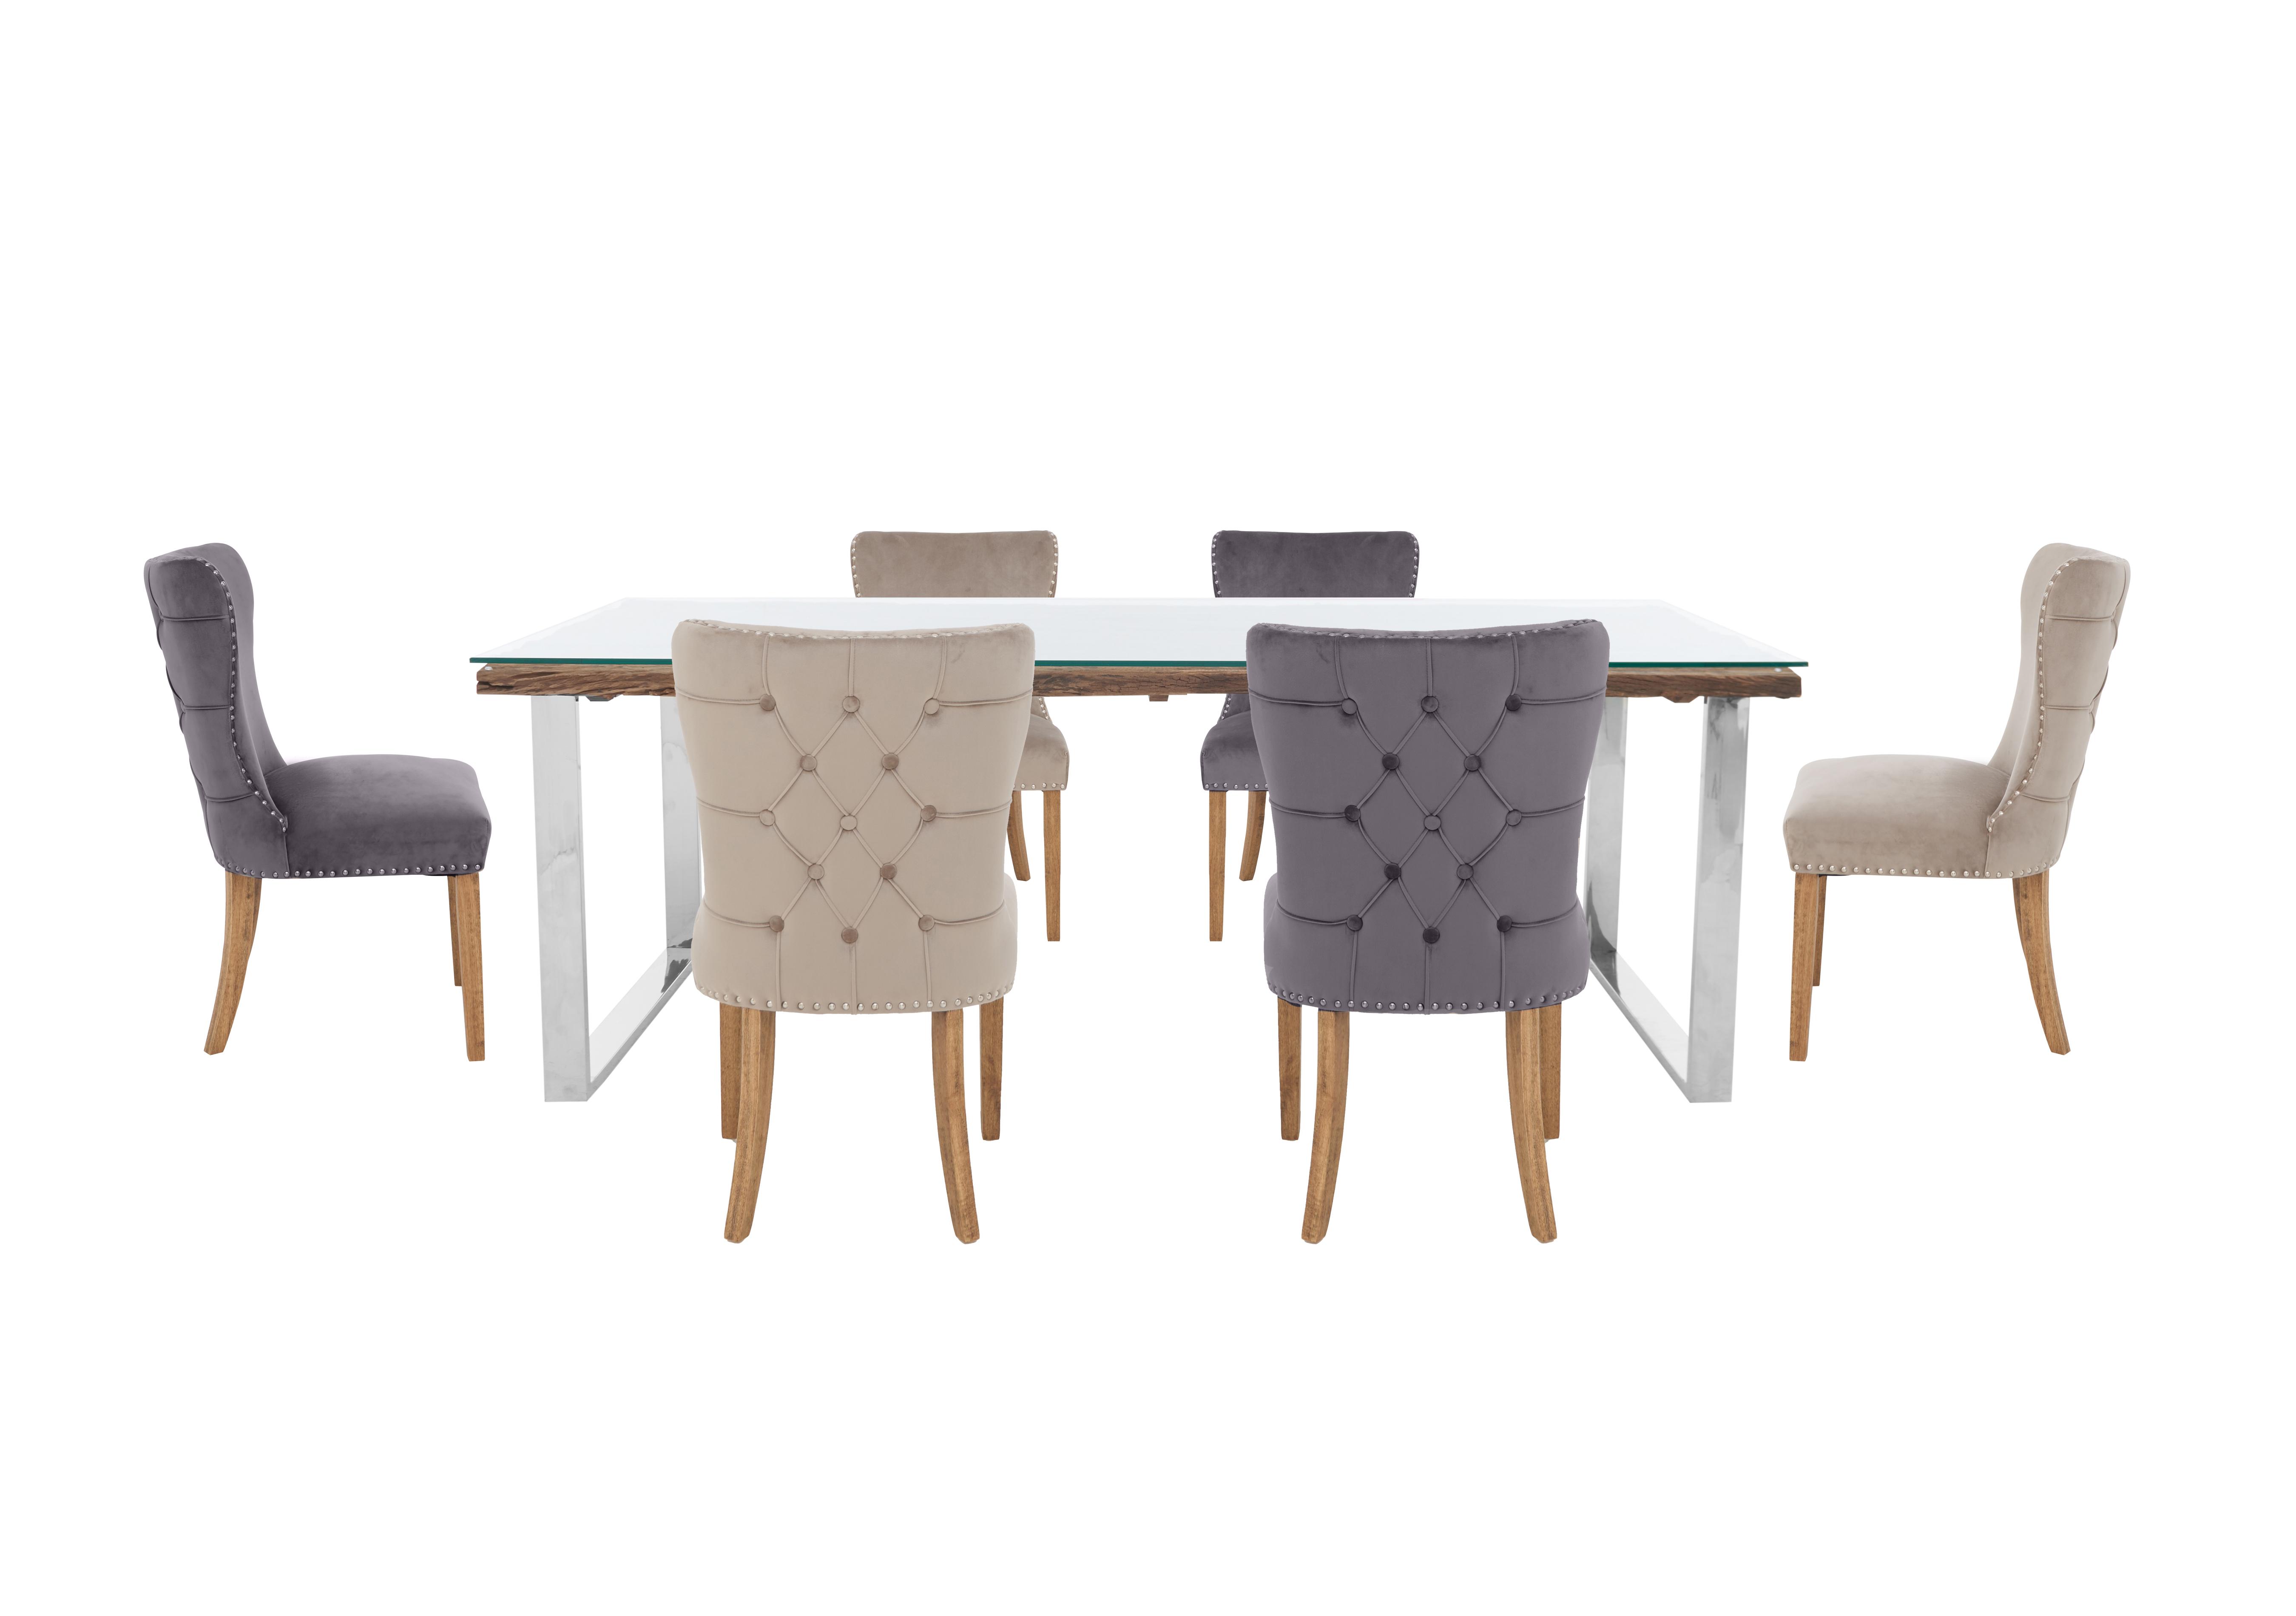 Chennai Dining Table with U-Leg Base and 6 Luxe Dining Chairs in Grey / Taupe on Furniture Village